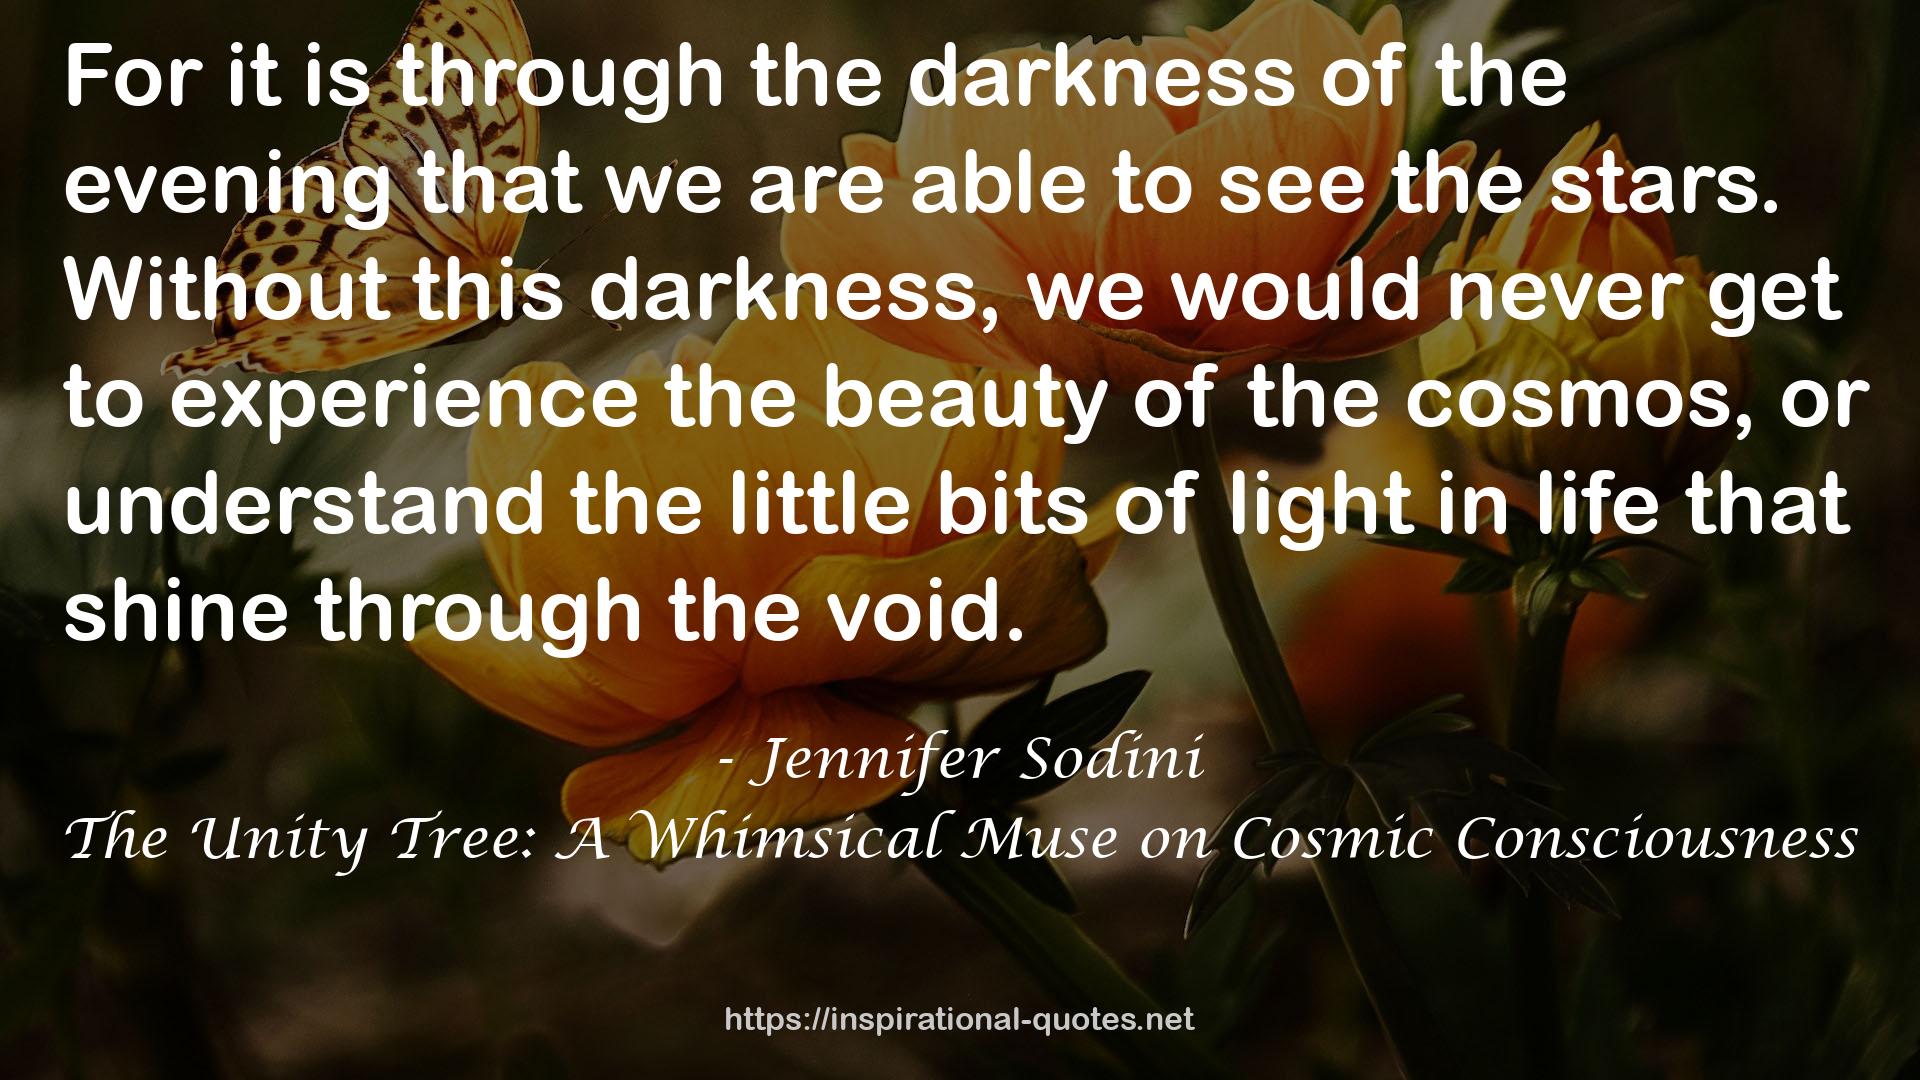 The Unity Tree: A Whimsical Muse on Cosmic Consciousness QUOTES